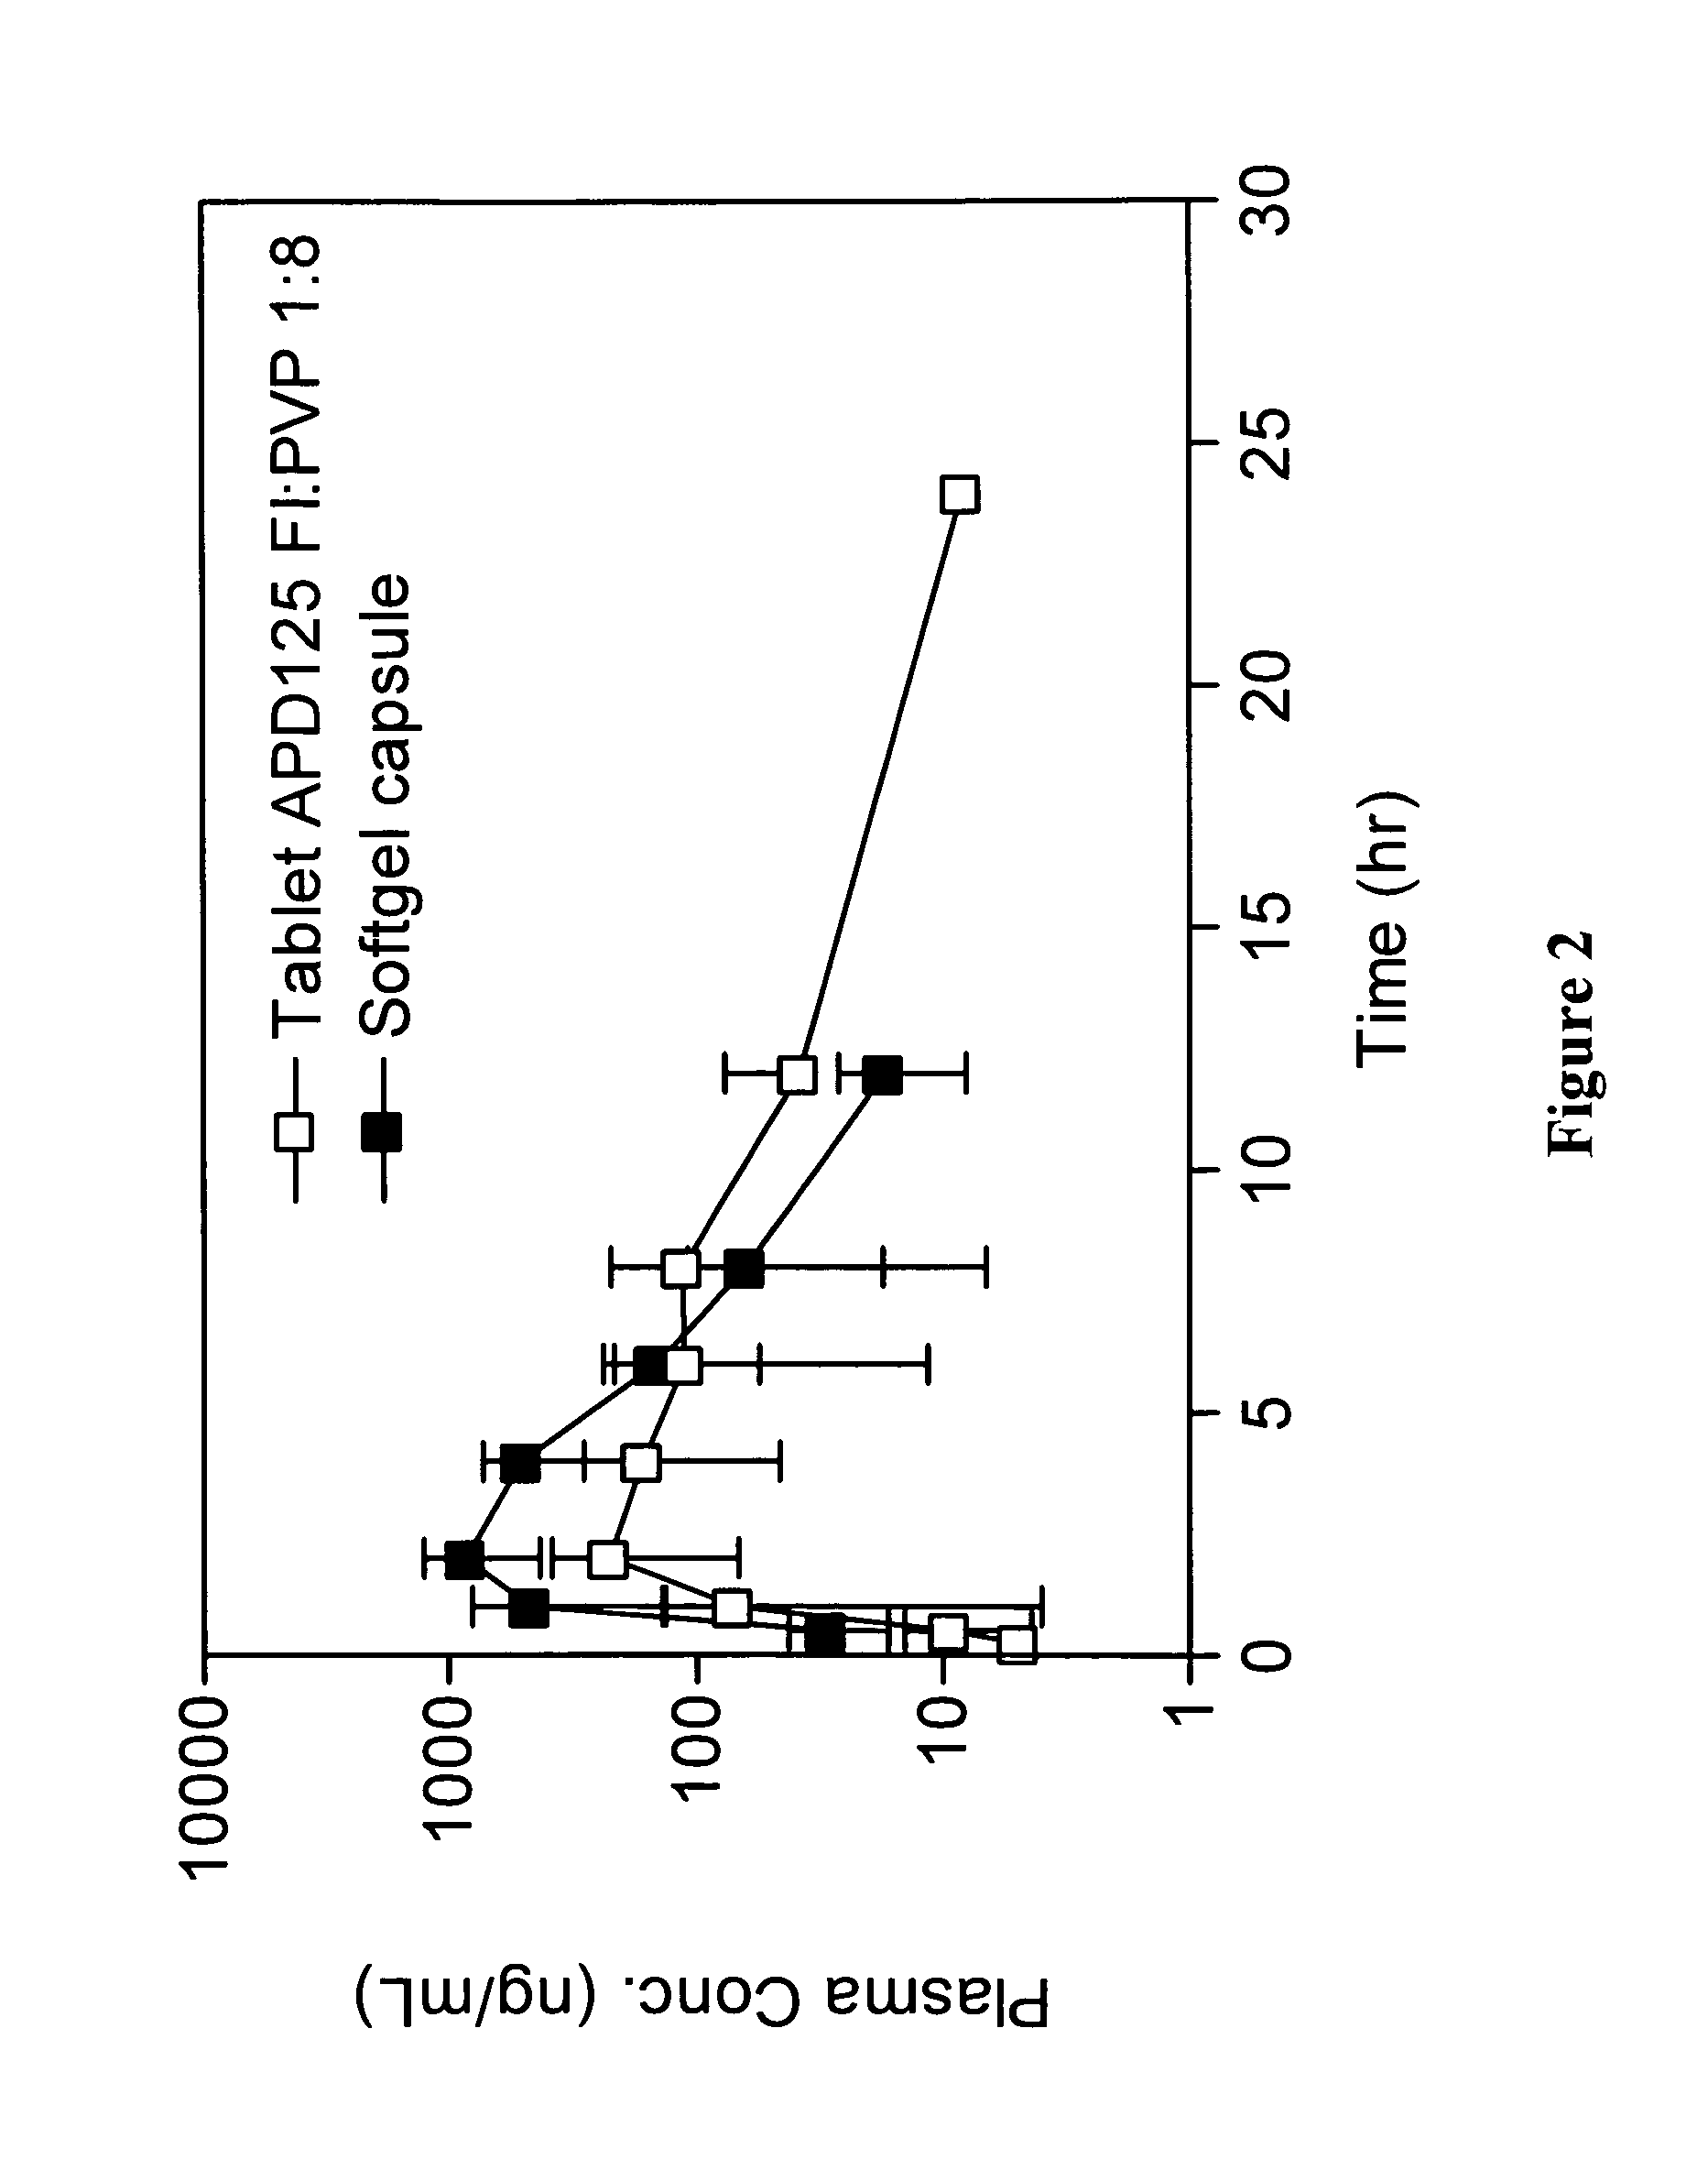 Composition of a 5-HT<sub>2A </sub>serotonin receptor modulator useful for the treatment of disorders related thereto